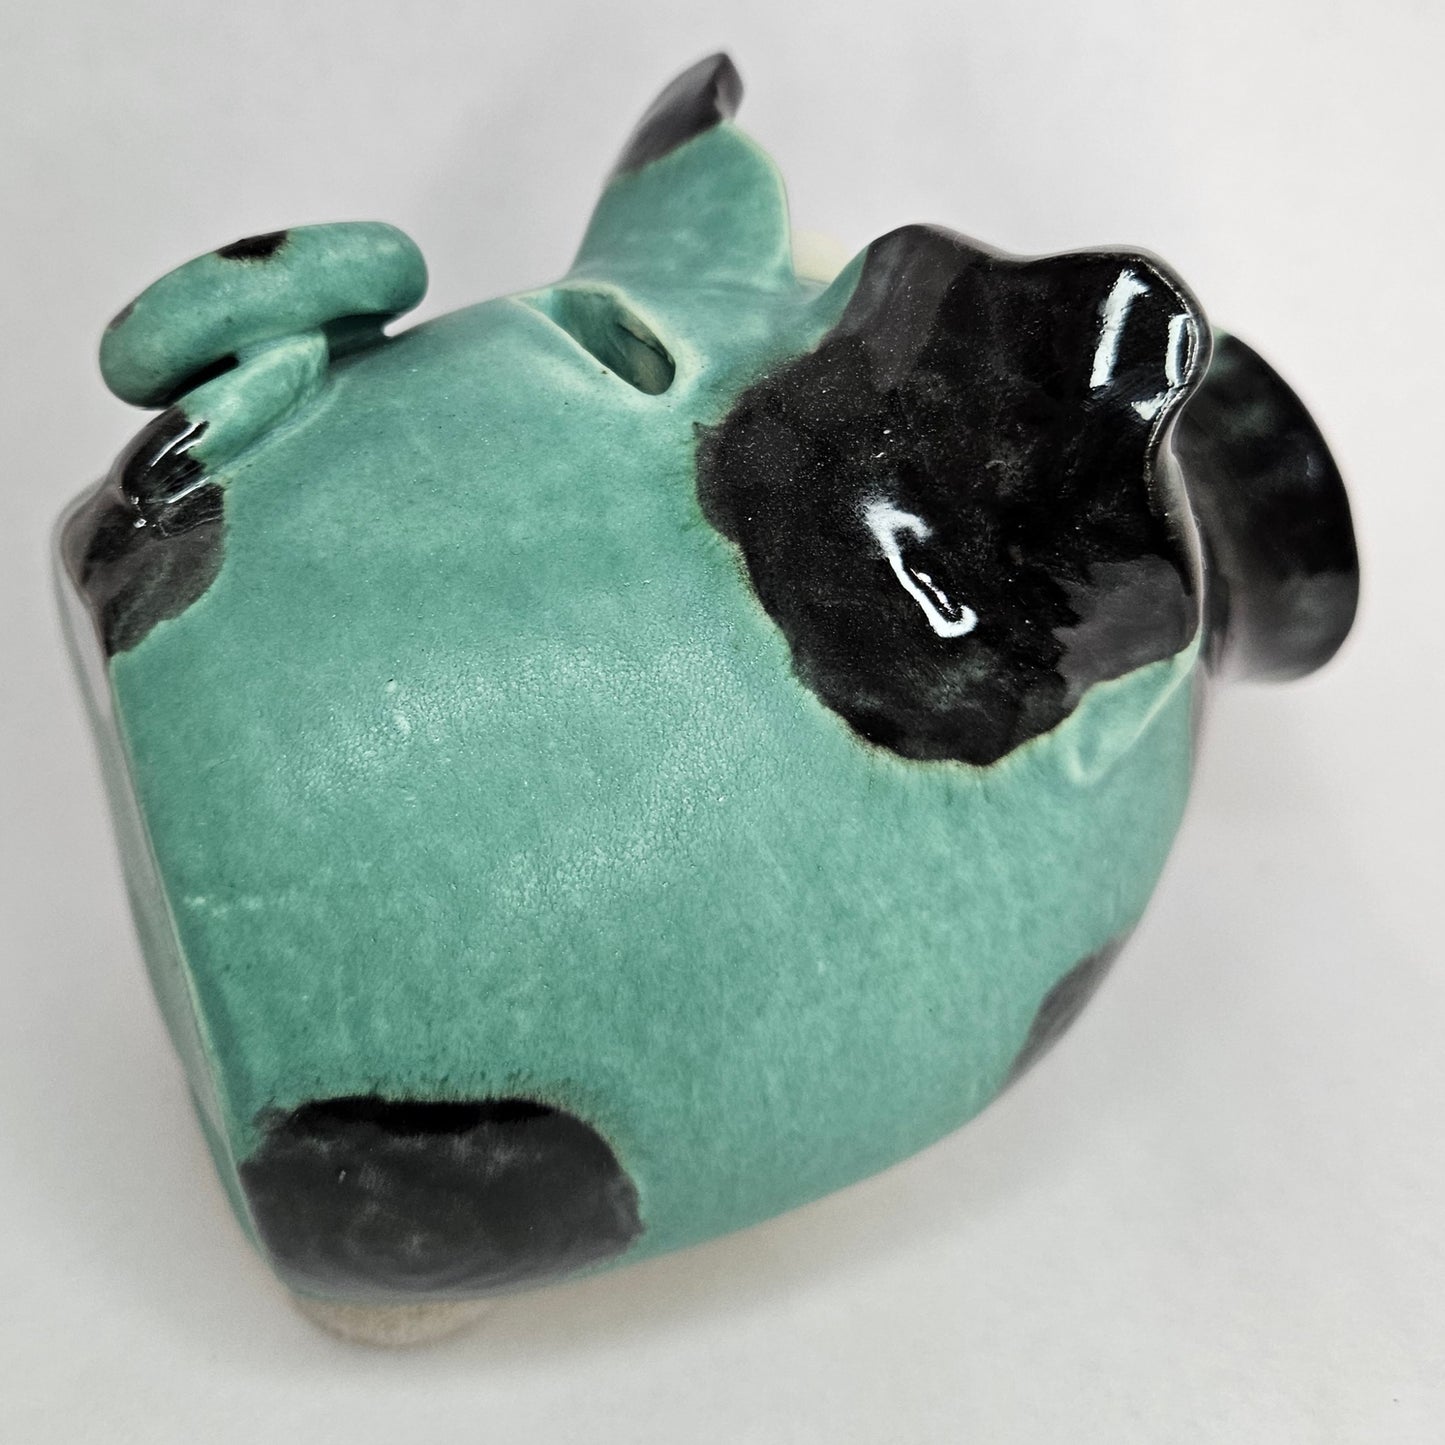 Piggie Bank - Small Teal Green and Black